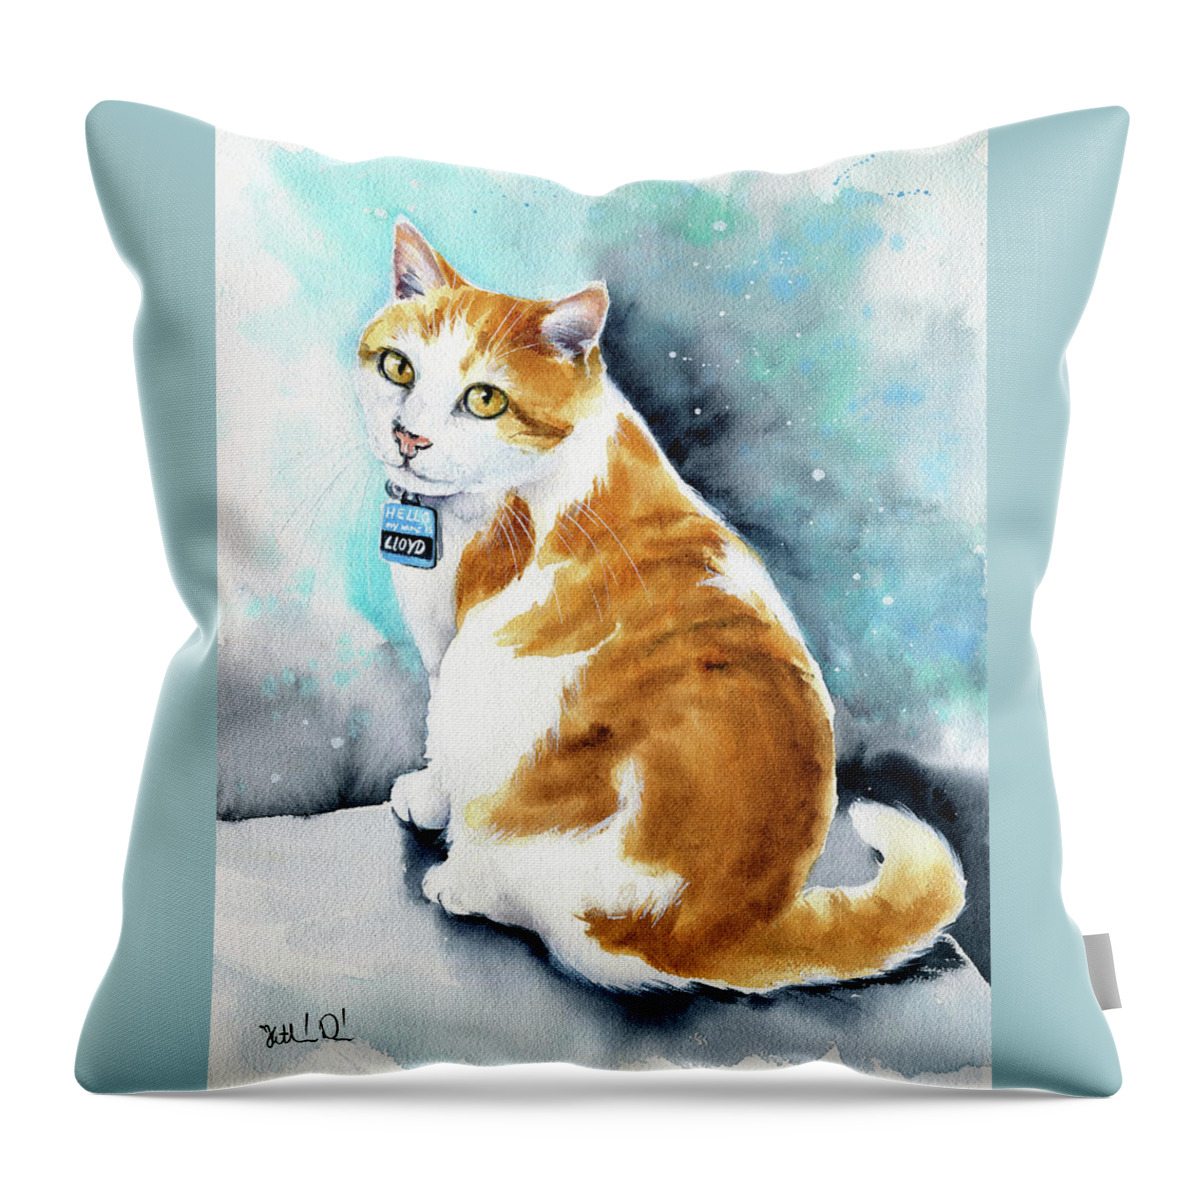 Cats Throw Pillow featuring the painting Lloyd The Cat by Dora Hathazi Mendes